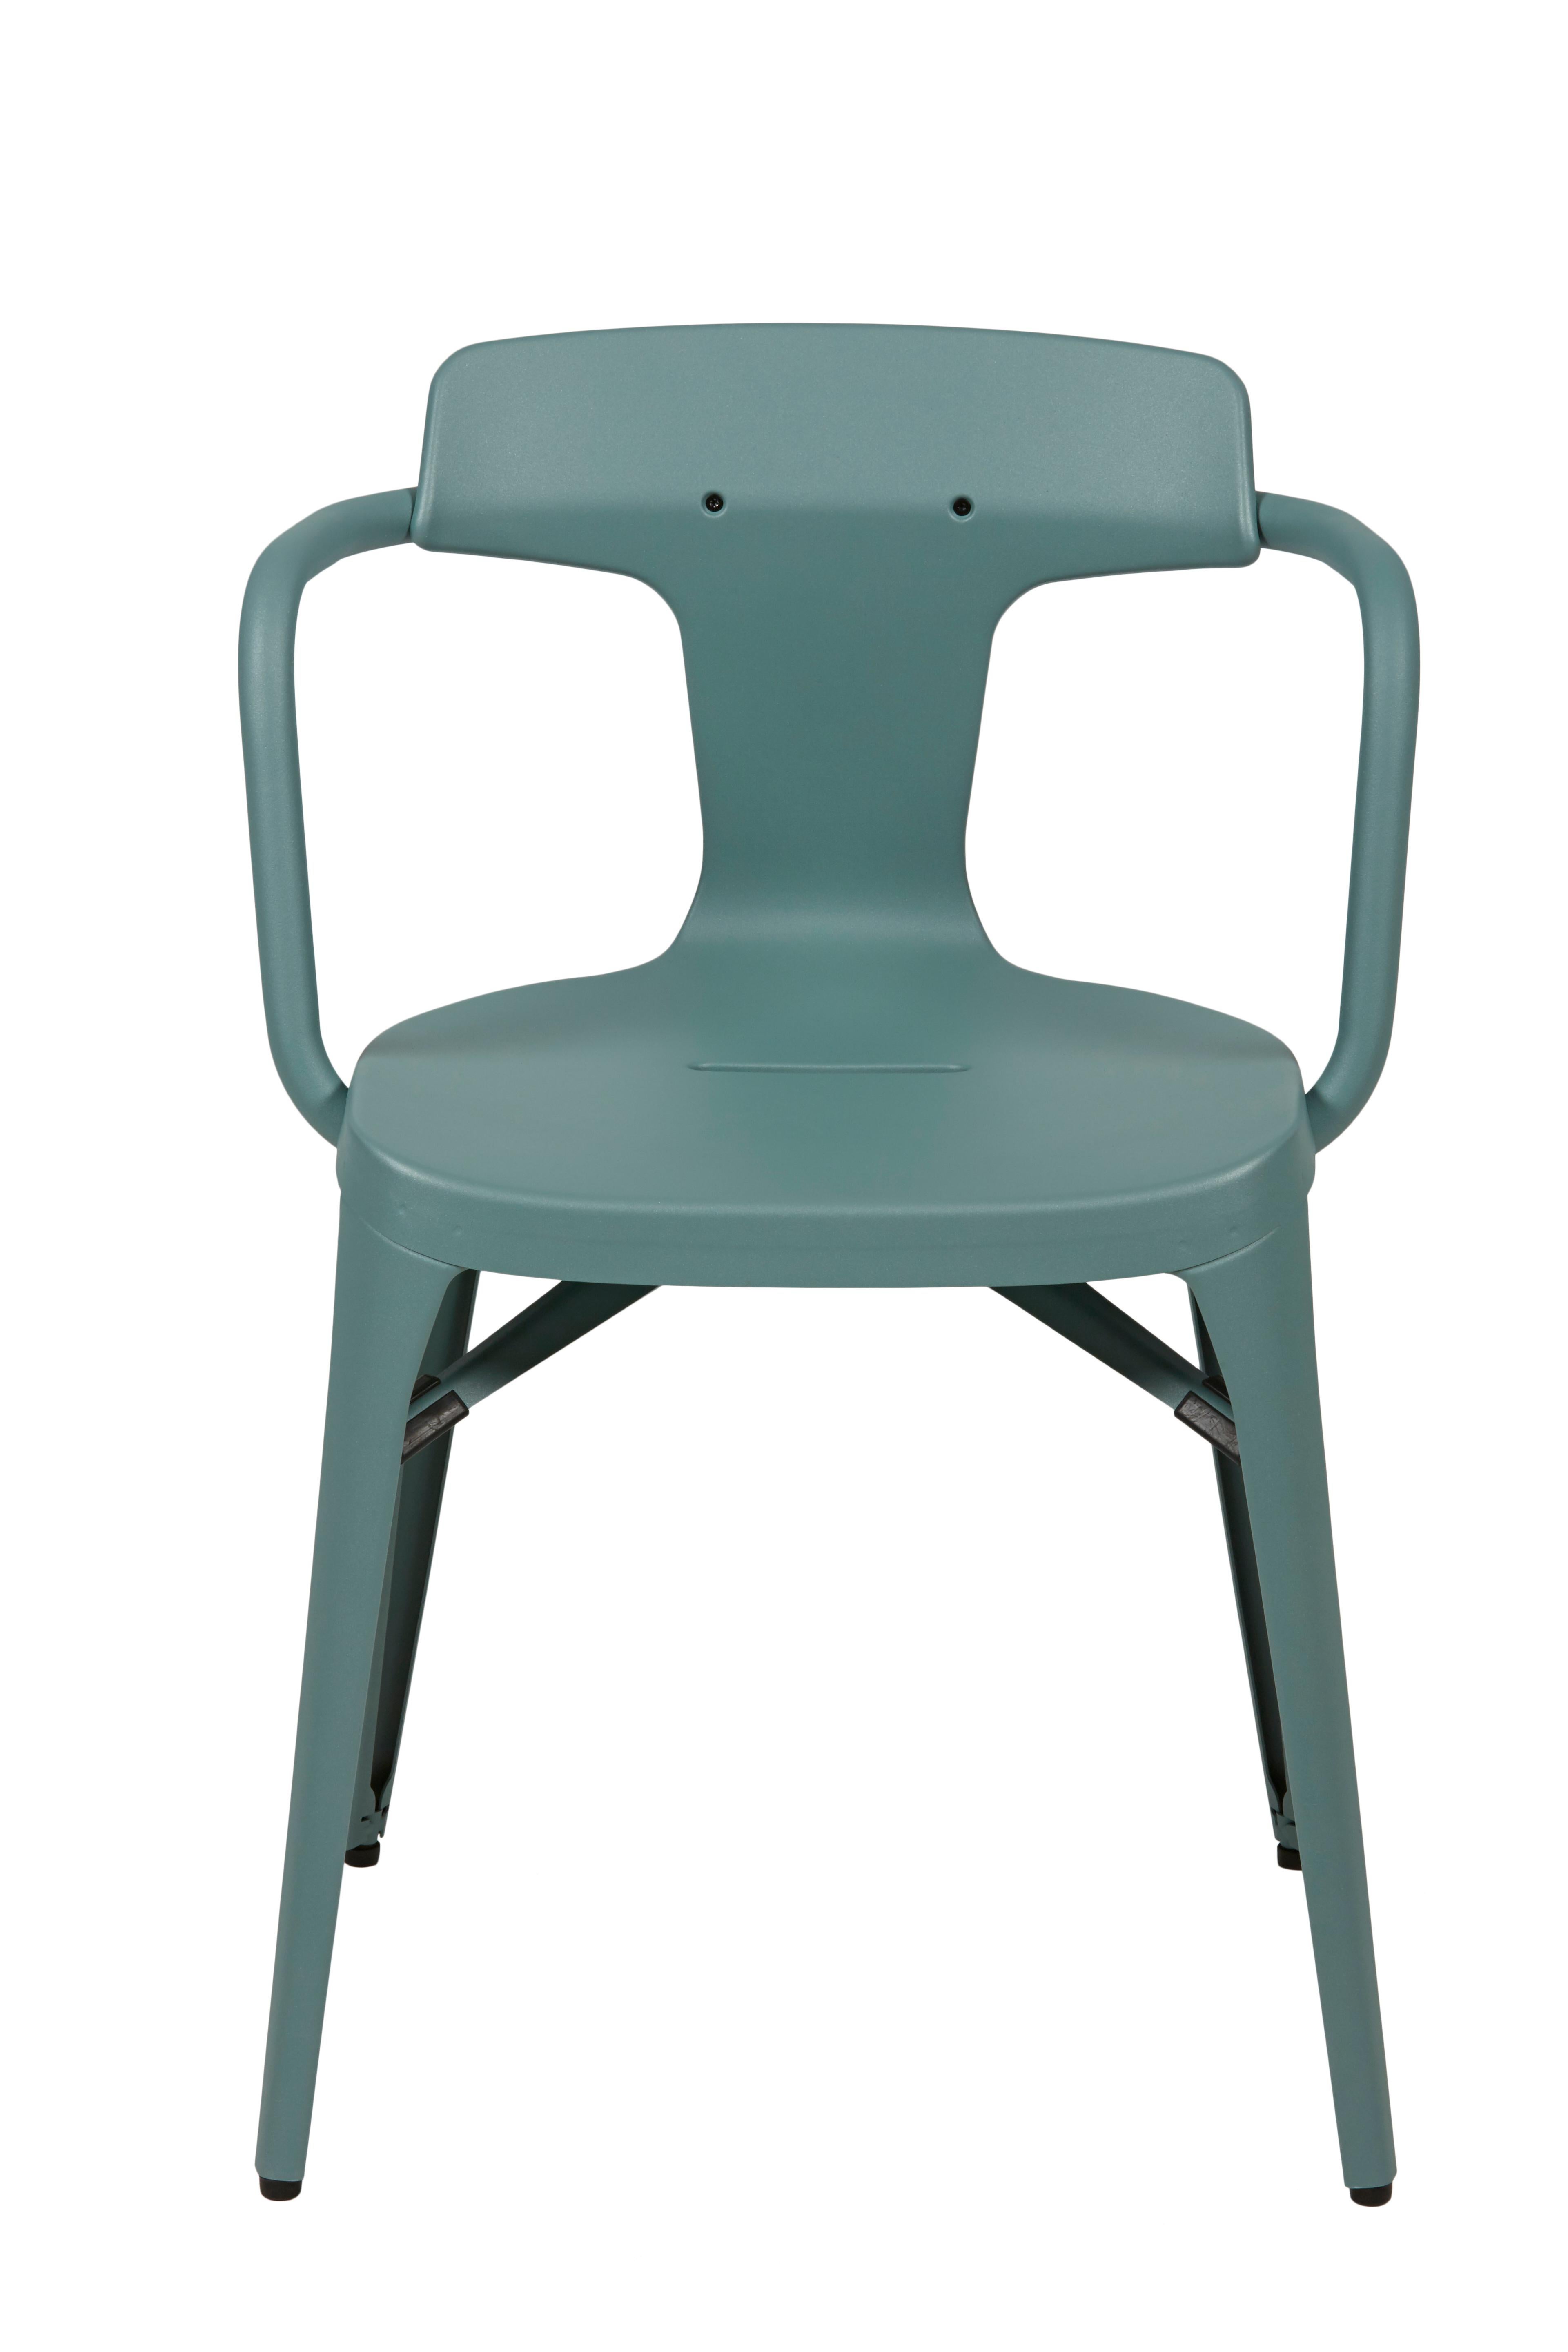 Im Angebot: T14 Chair in Pop Colors by Patrick Norguet and Tolix, Green (Vert Lichen)